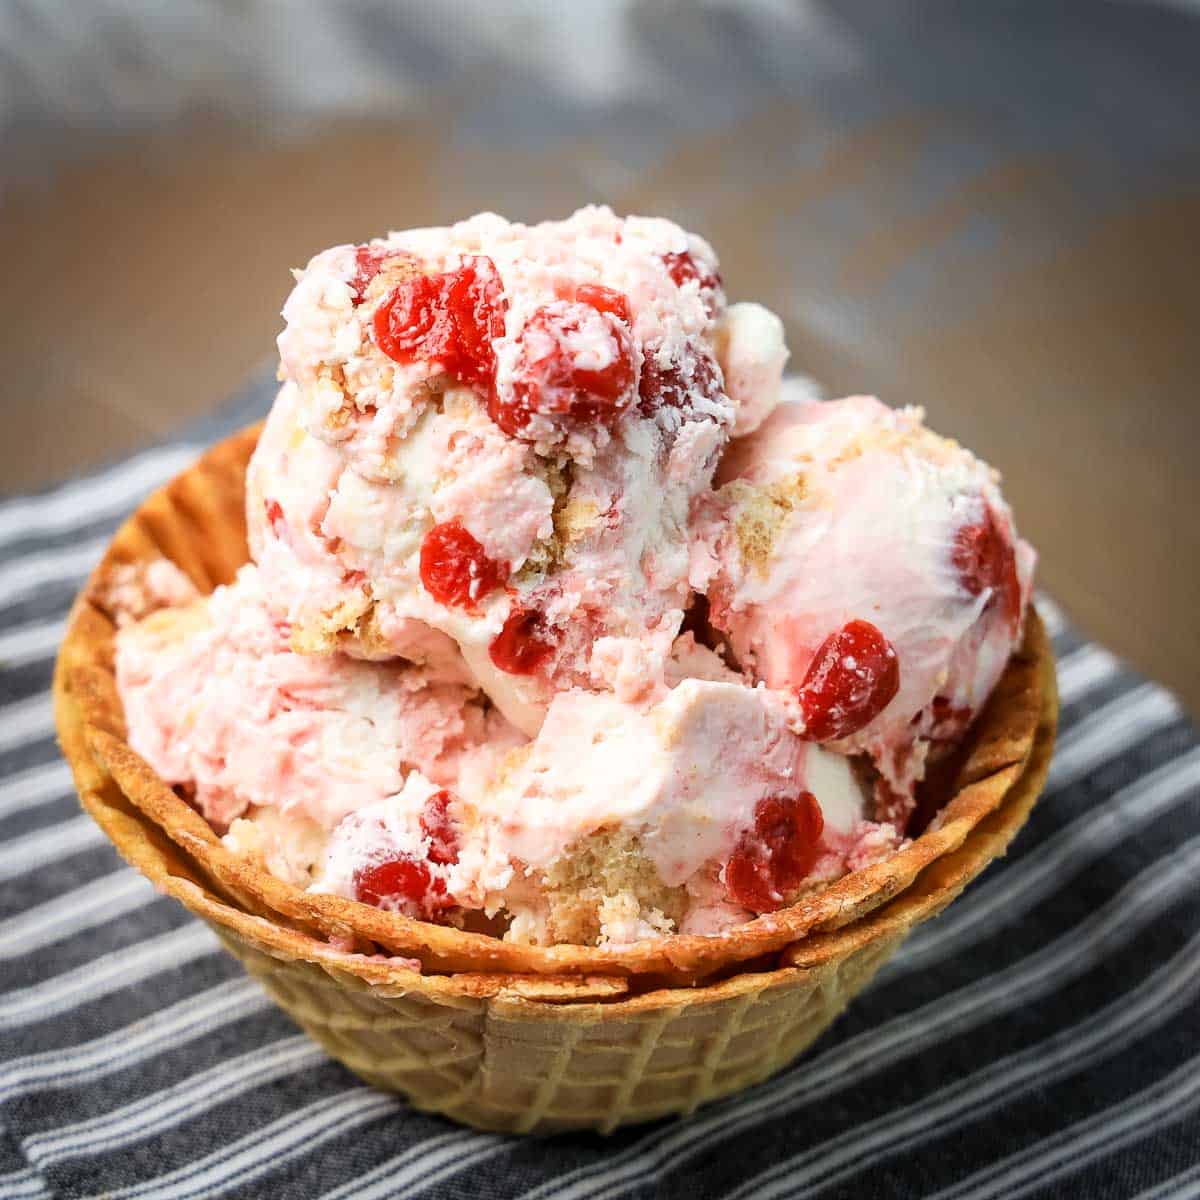 Side angled shot of cherry vanilla ice cream in a waffle cone bowl on a black and white striped cloth.